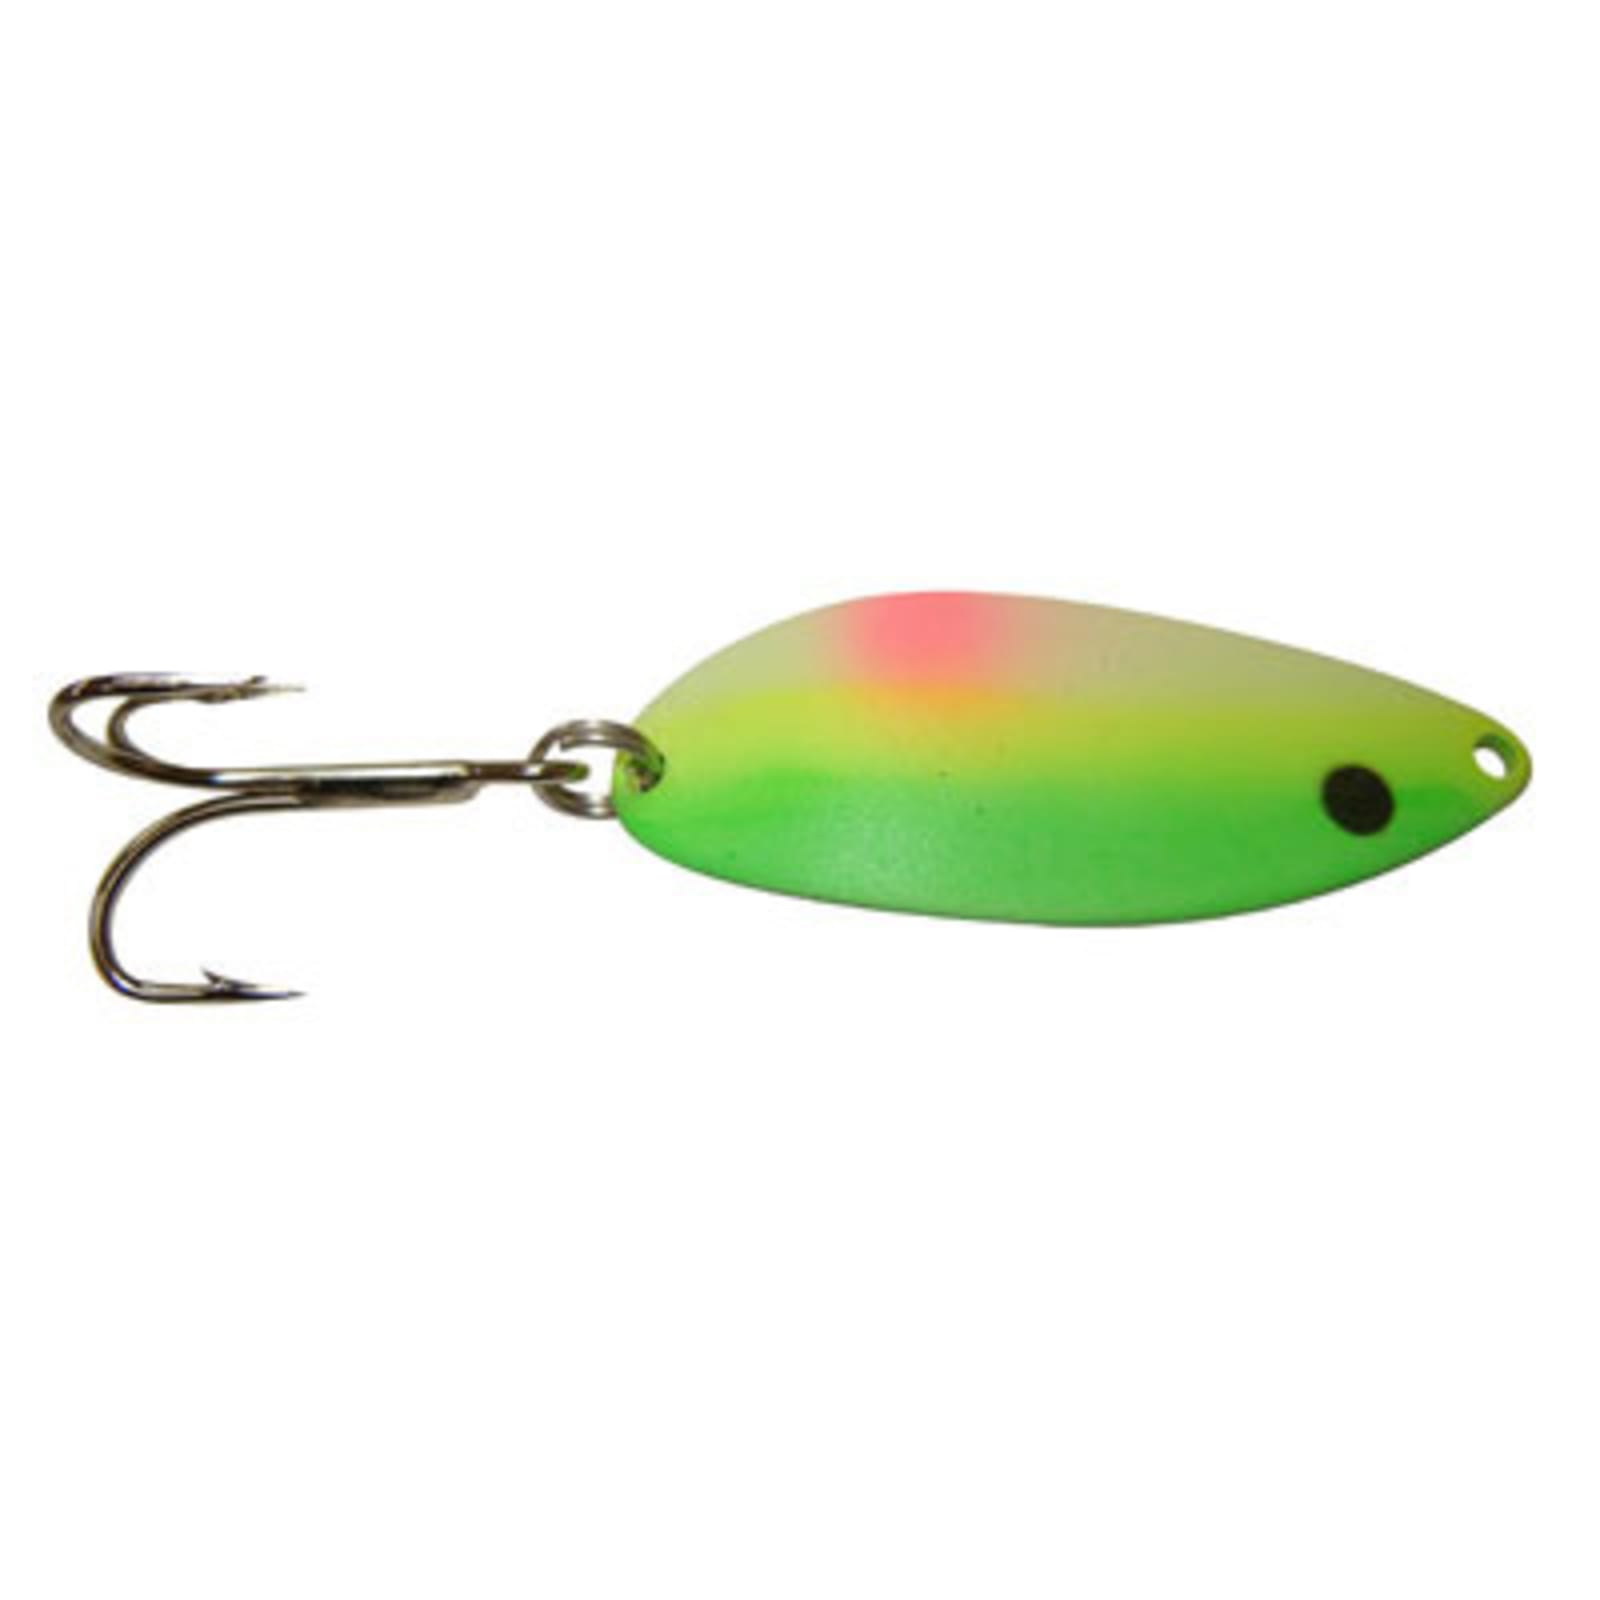 Little Cleo Spoon - Glow Green/Alewife by Acme Tackle Company at